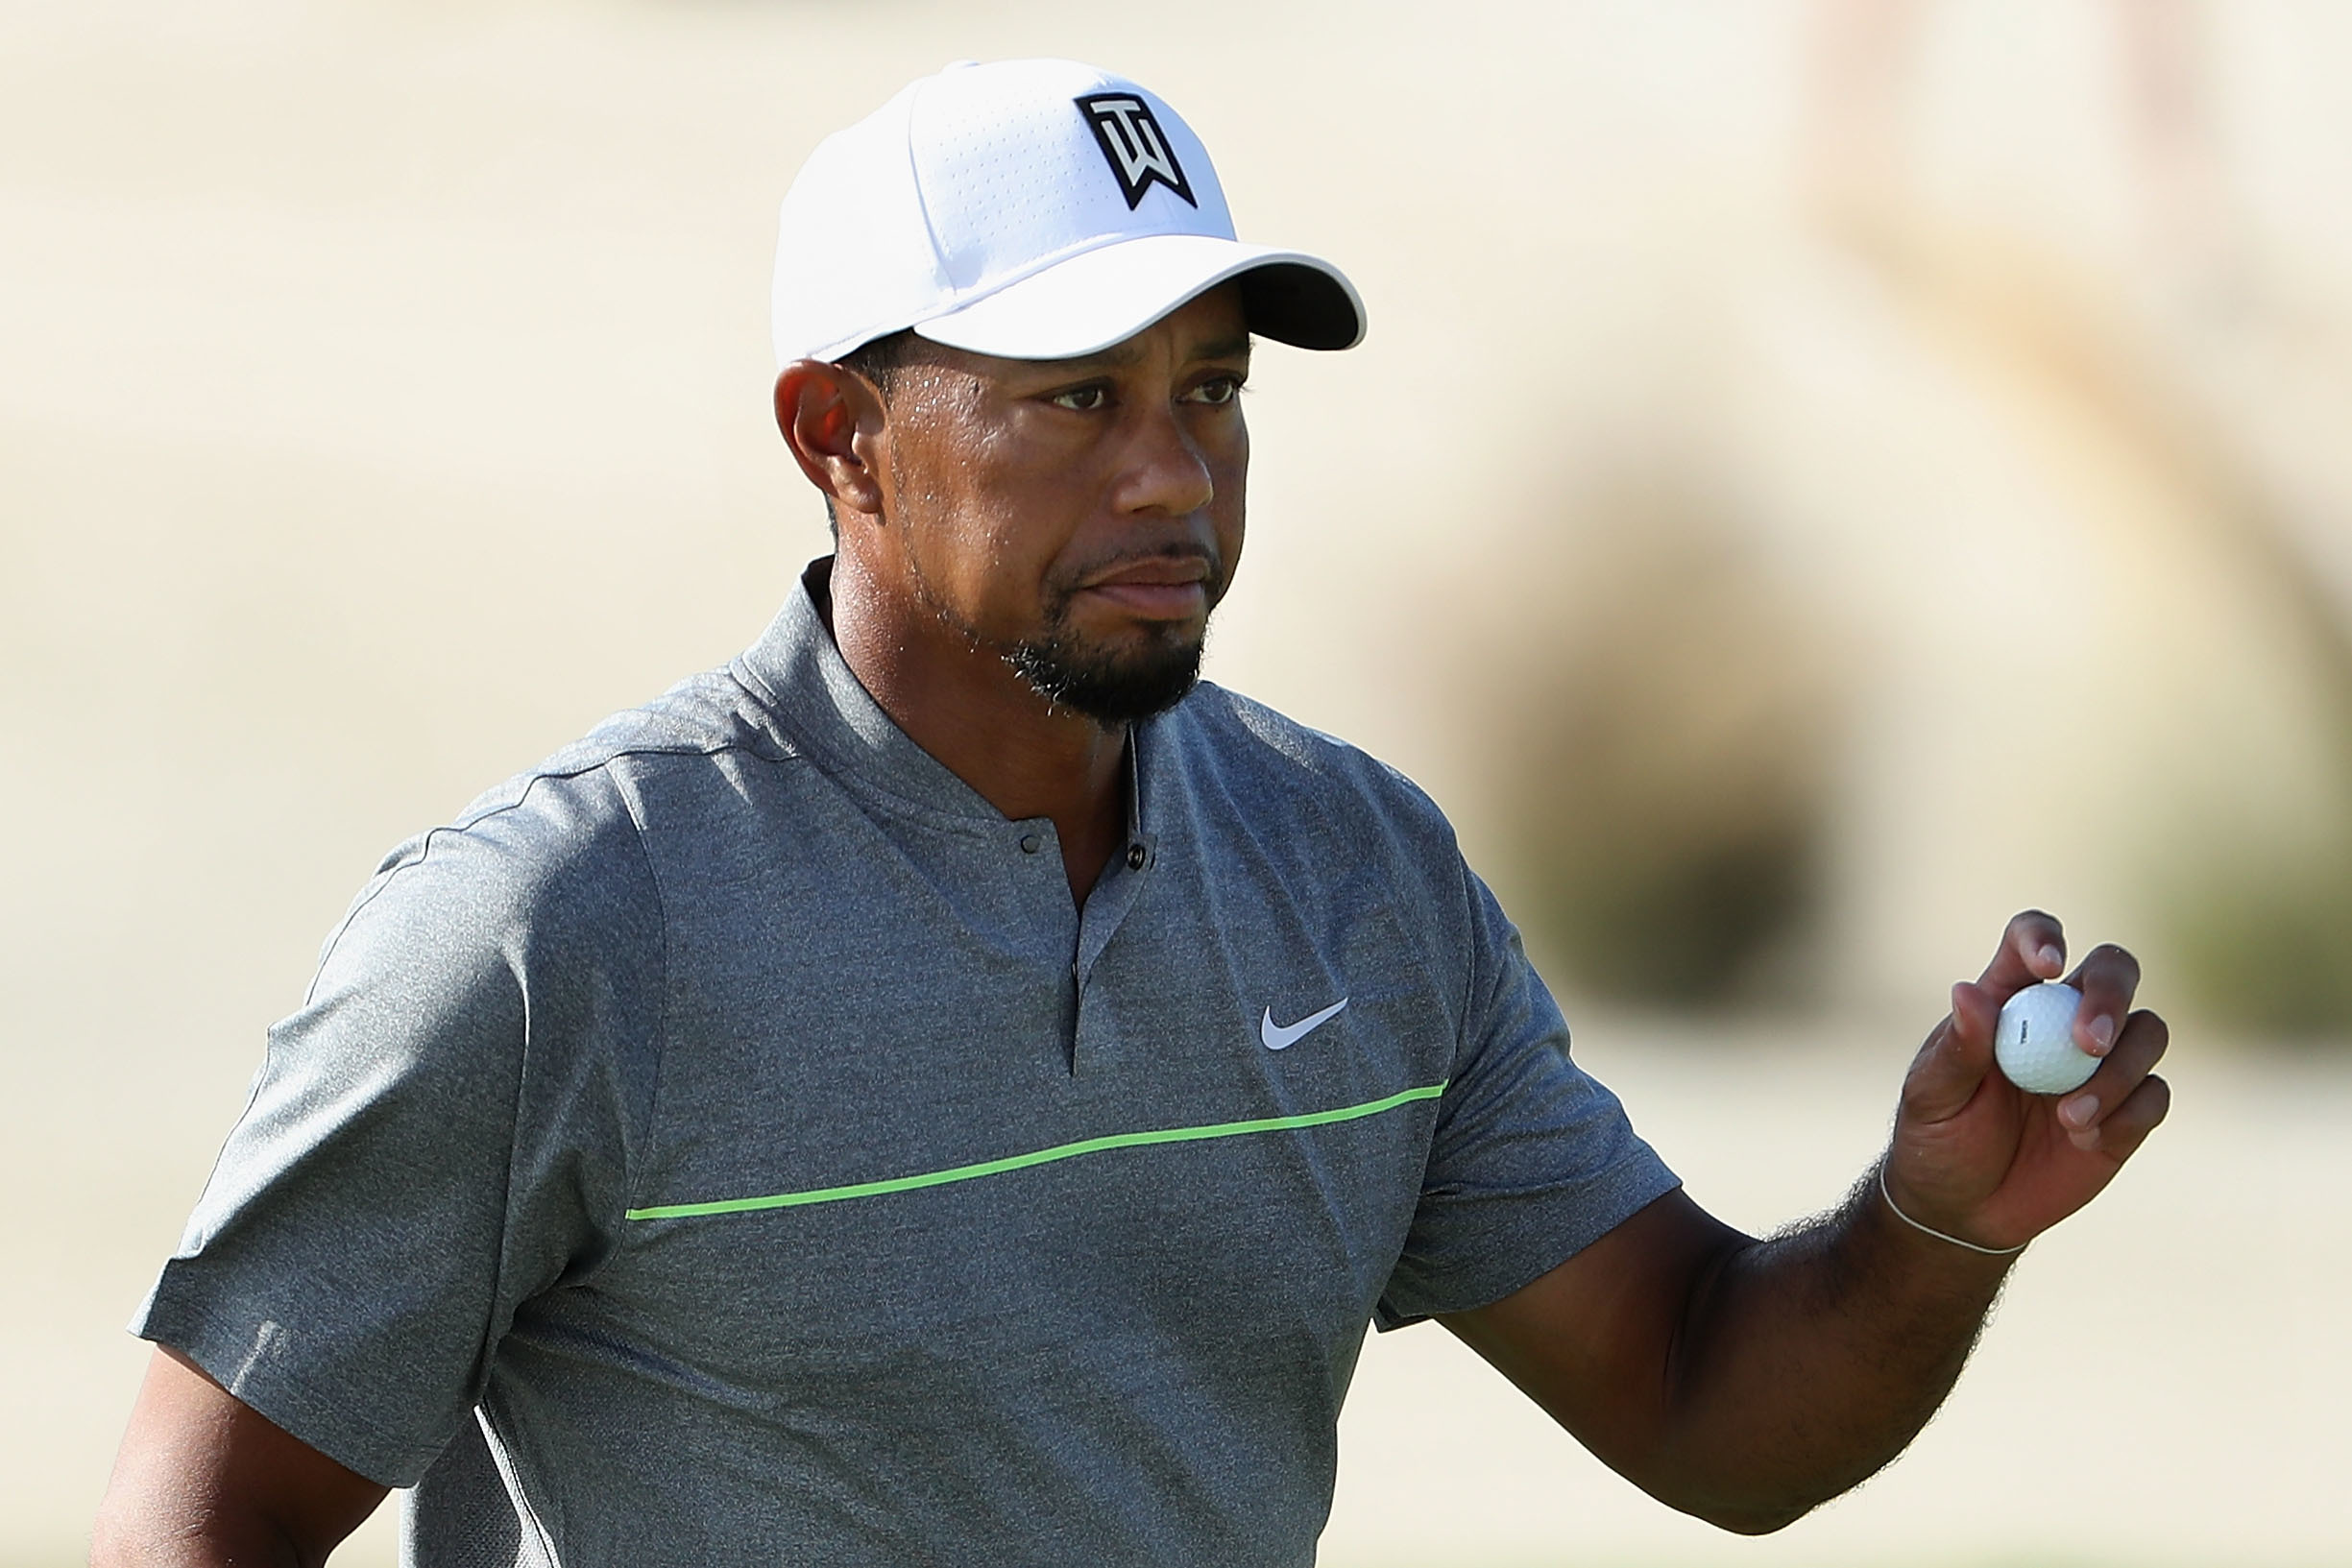 Tiger Woods back on a golf course competing.